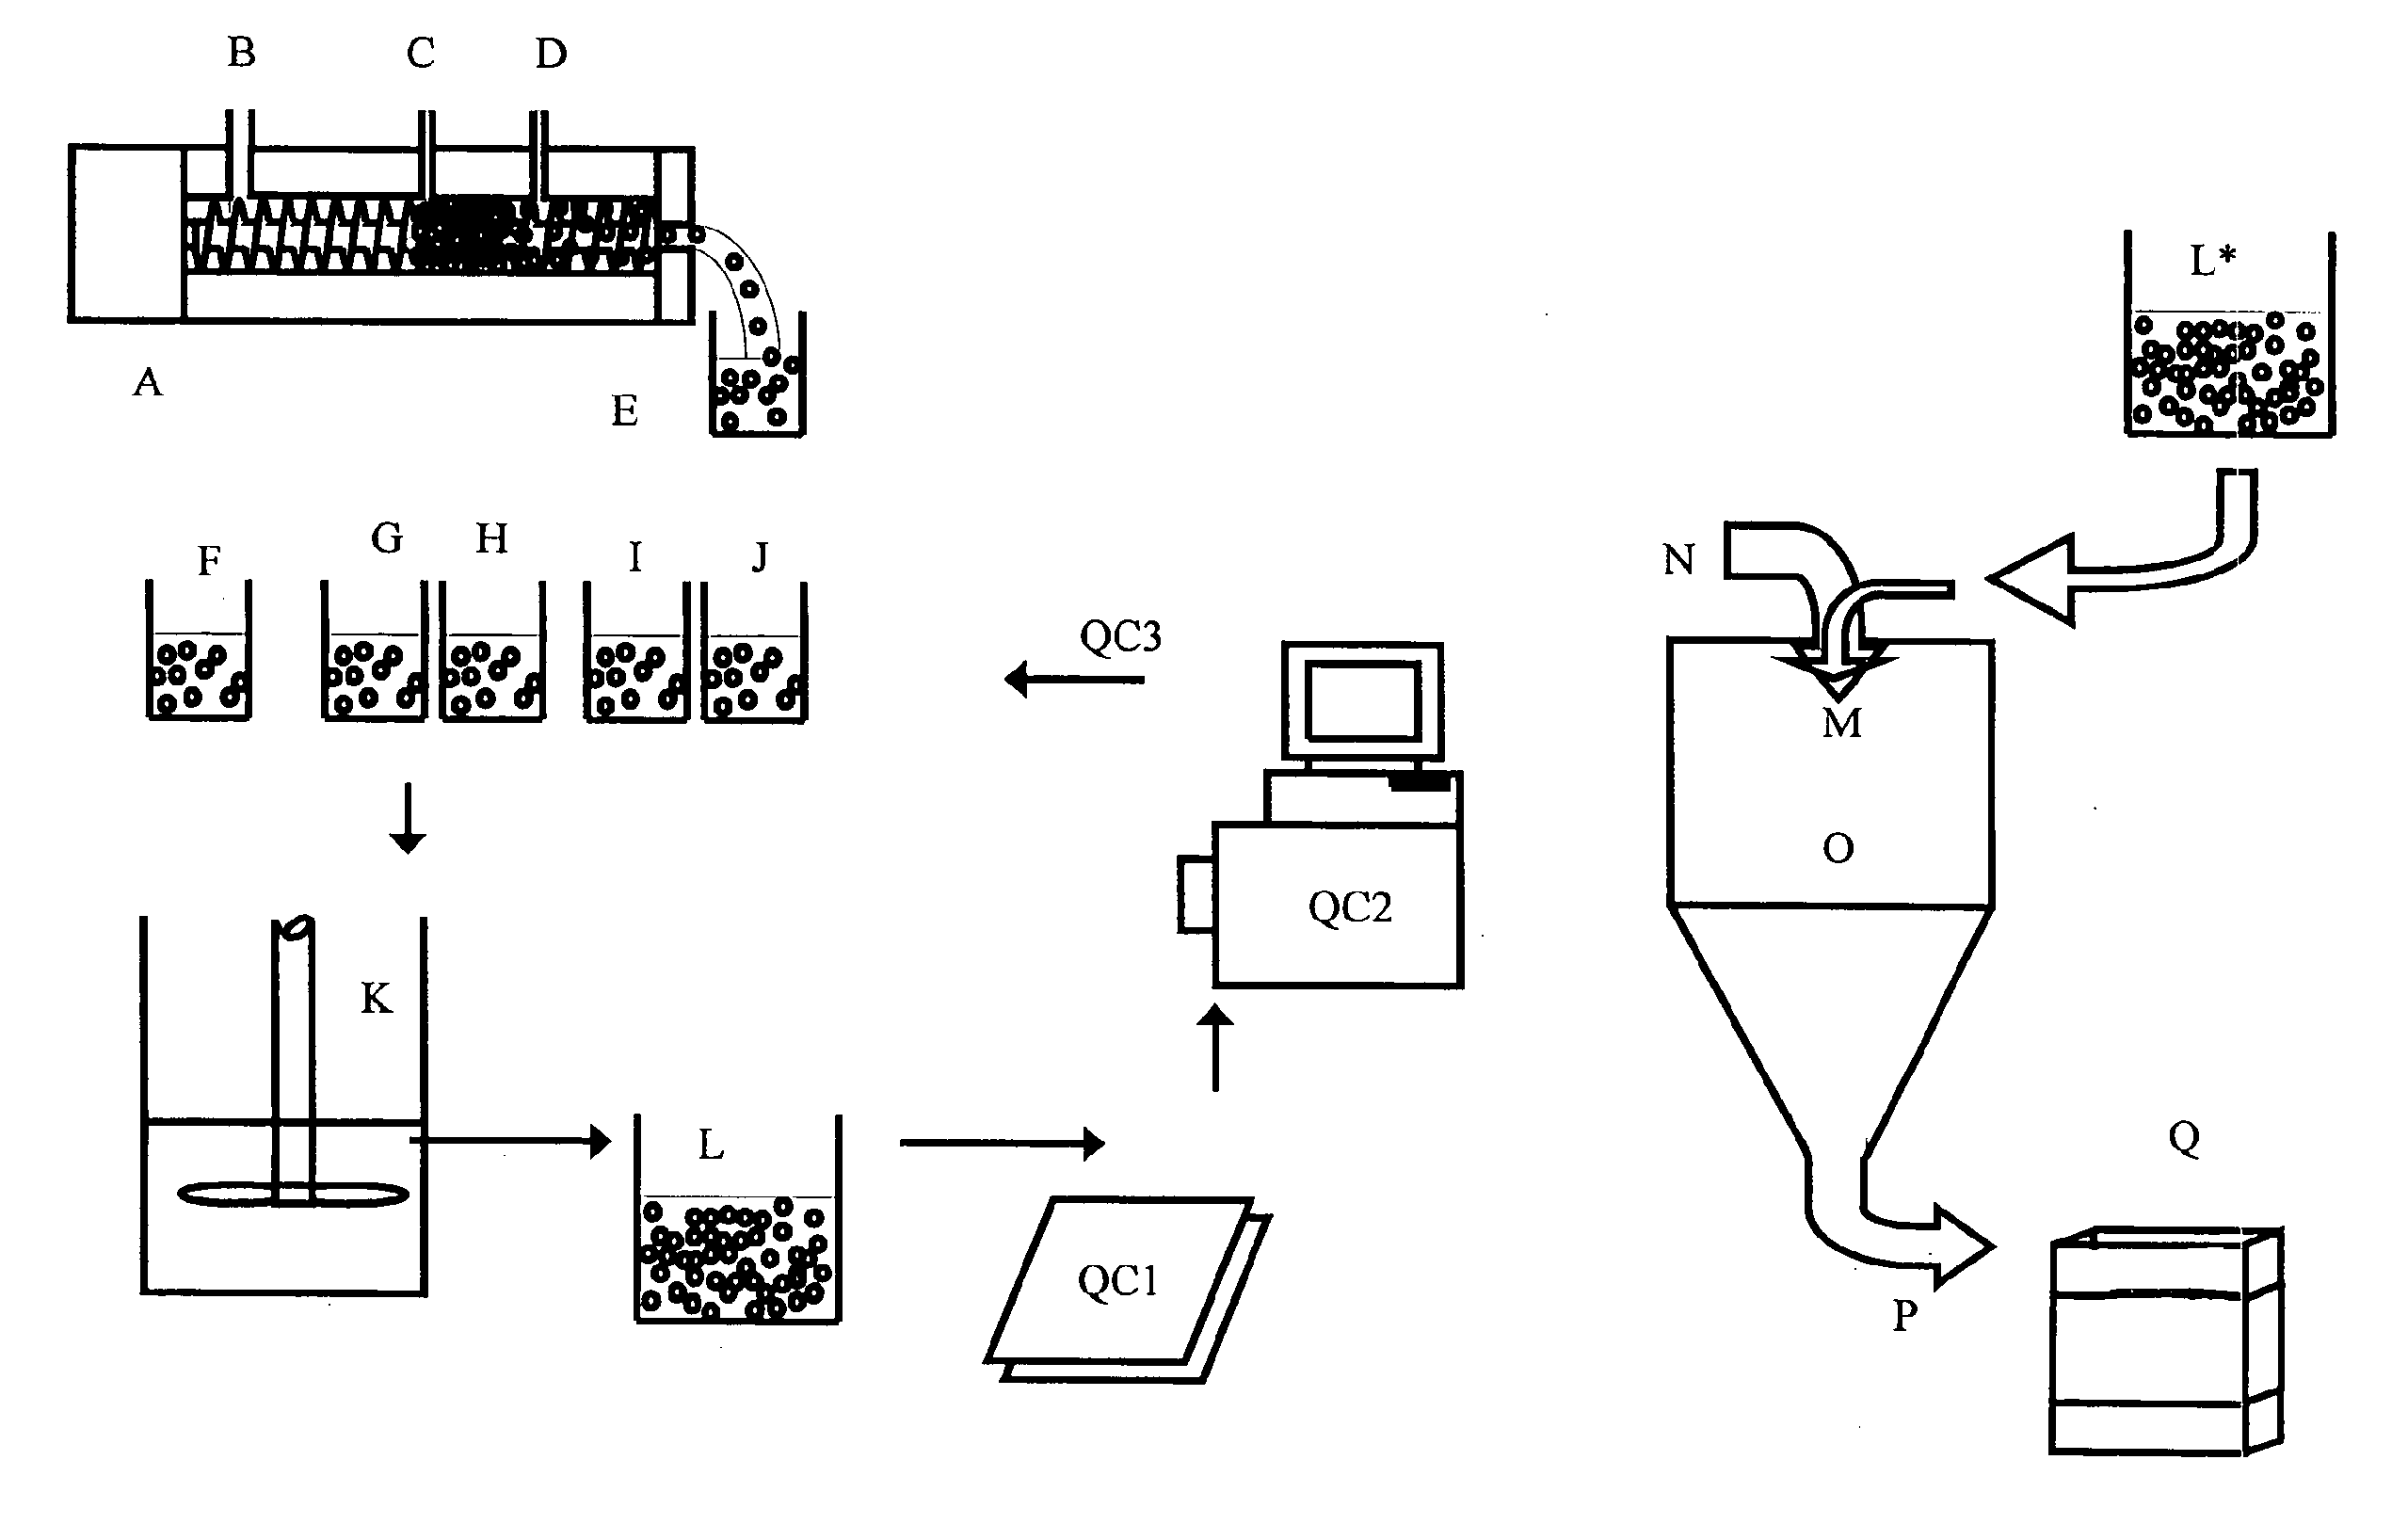 Process for preparing a powder coating composition